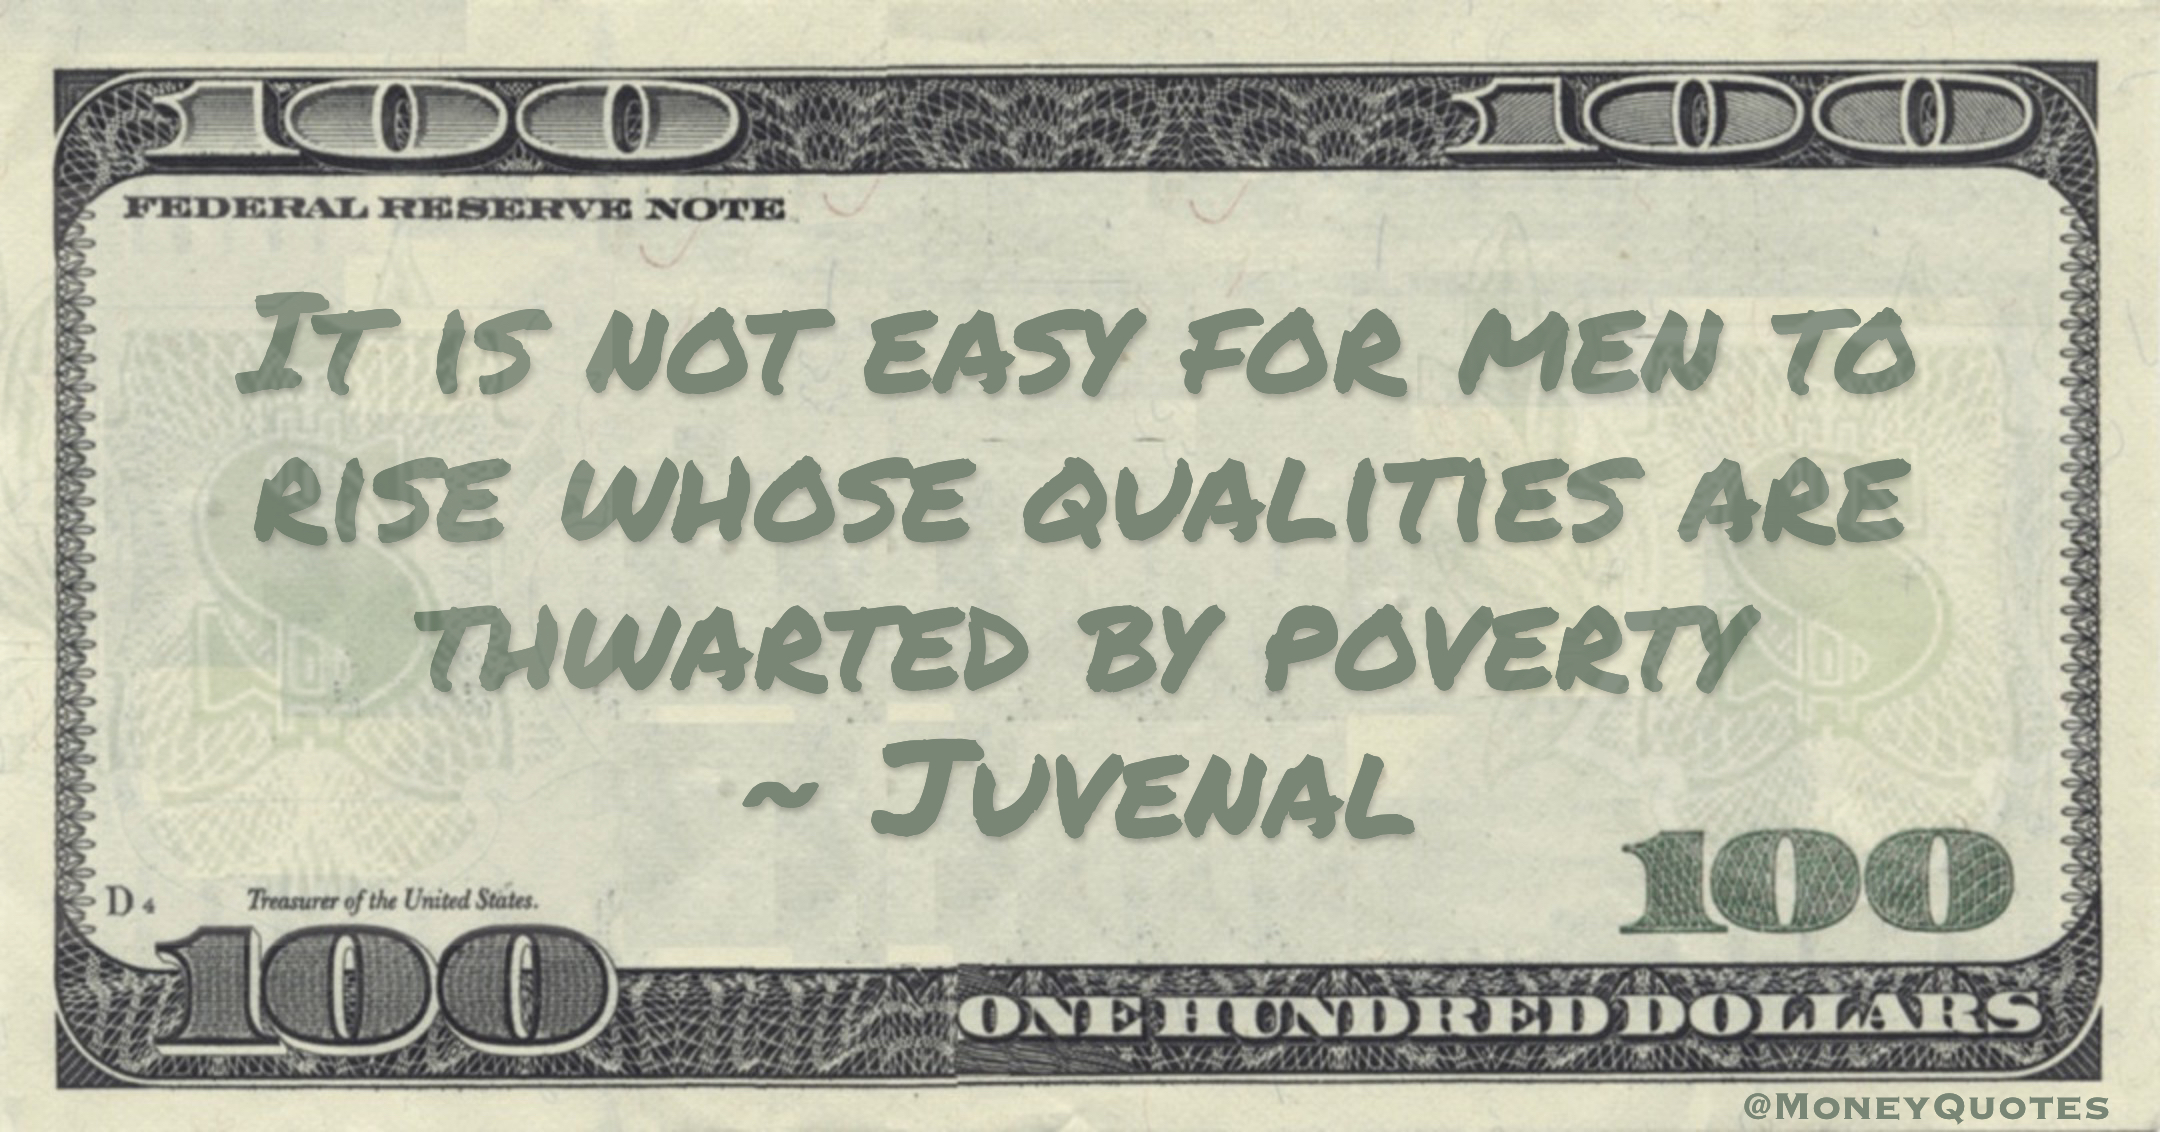 It is not easy for men to rise whose qualities are thwarted by poverty Quote